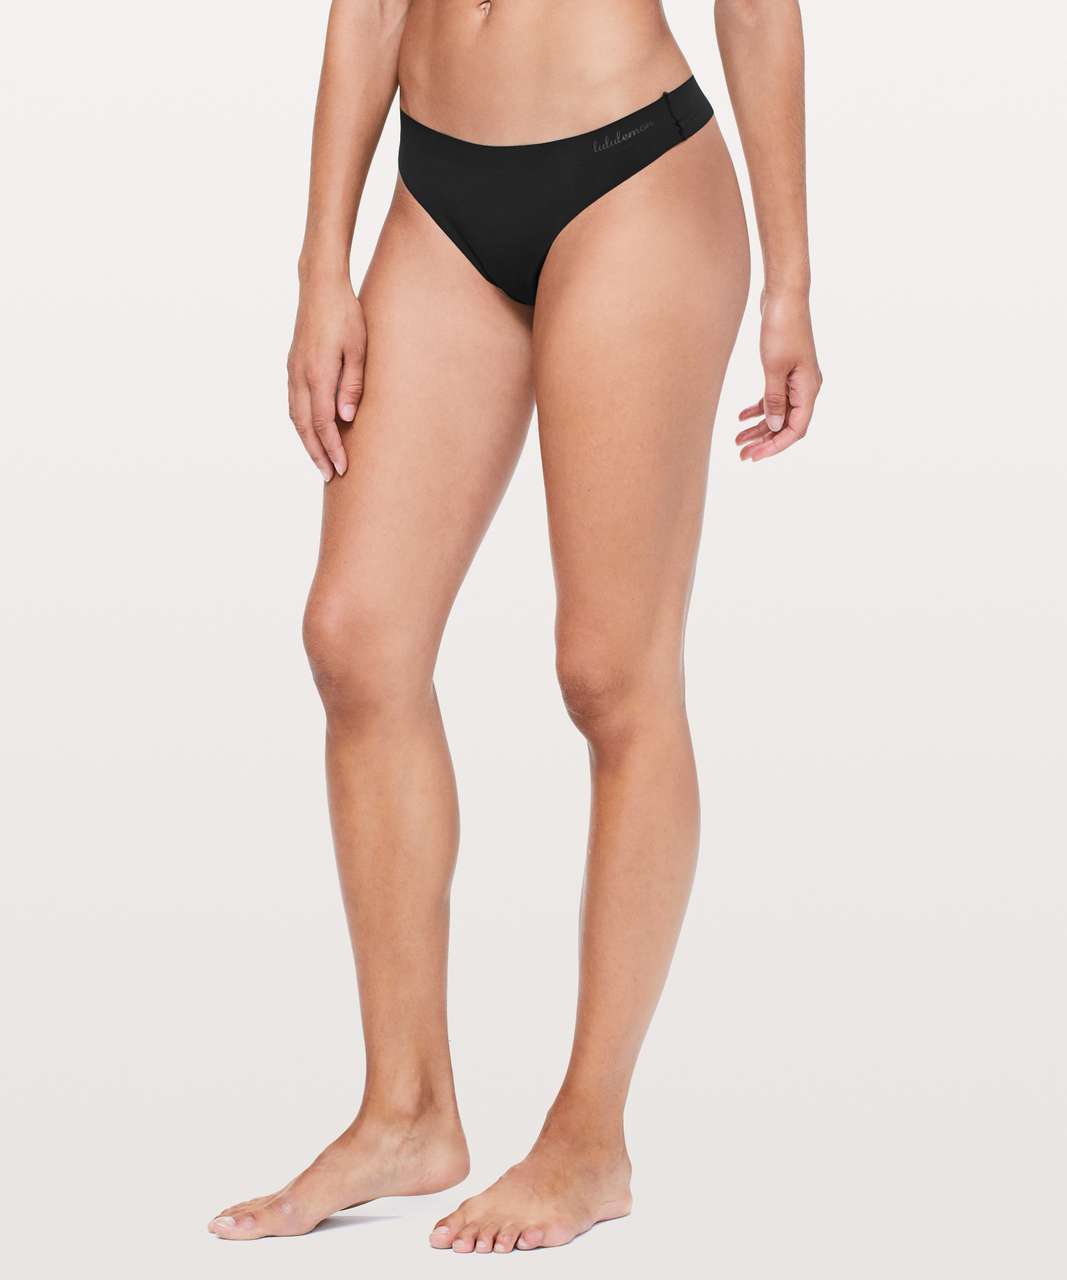 Lululemon Not So There Thong - Black